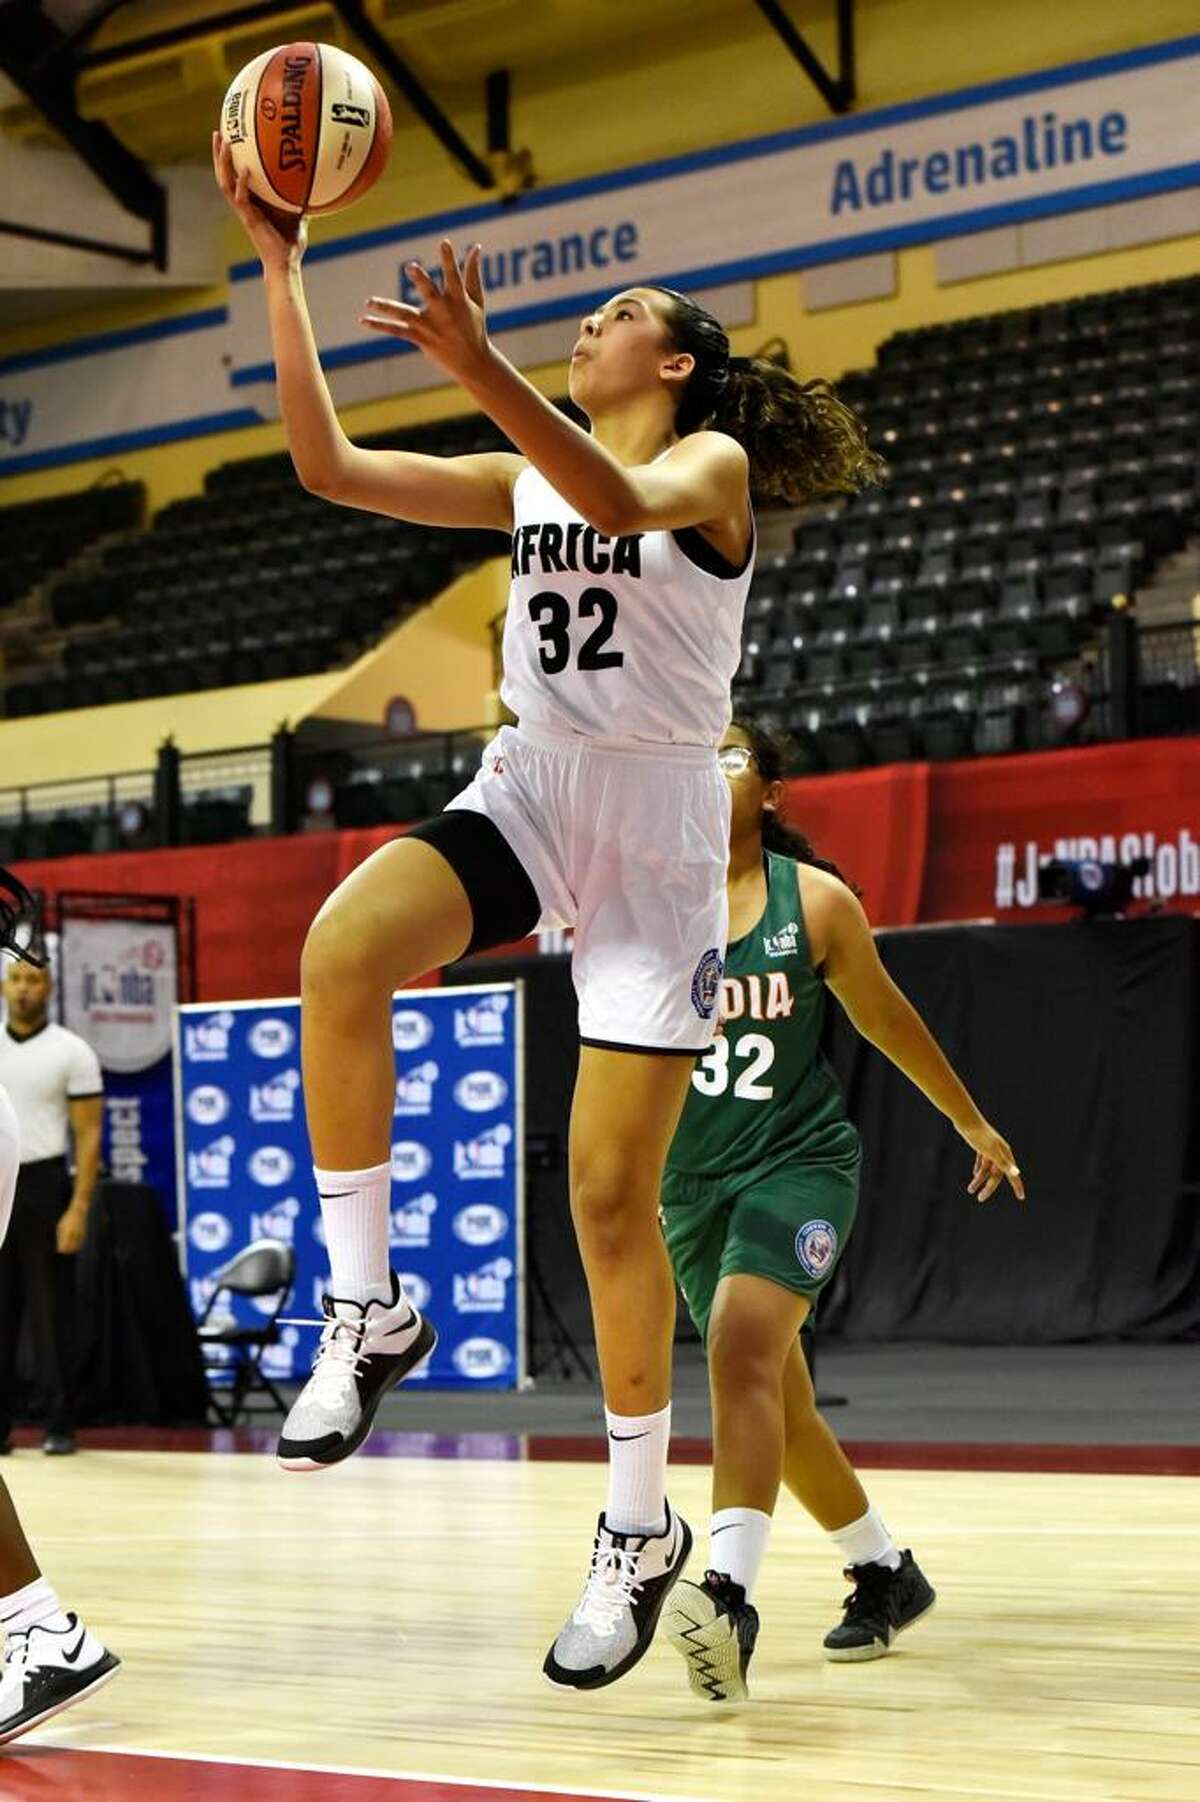 Jana El Alfy has represented Egypt on the global stage three times. Most recently, the UConn women's basketball recruit helped lead the country to a silver medal at the 2022 FIBA U18 African Women’s Championship in Madagascar.